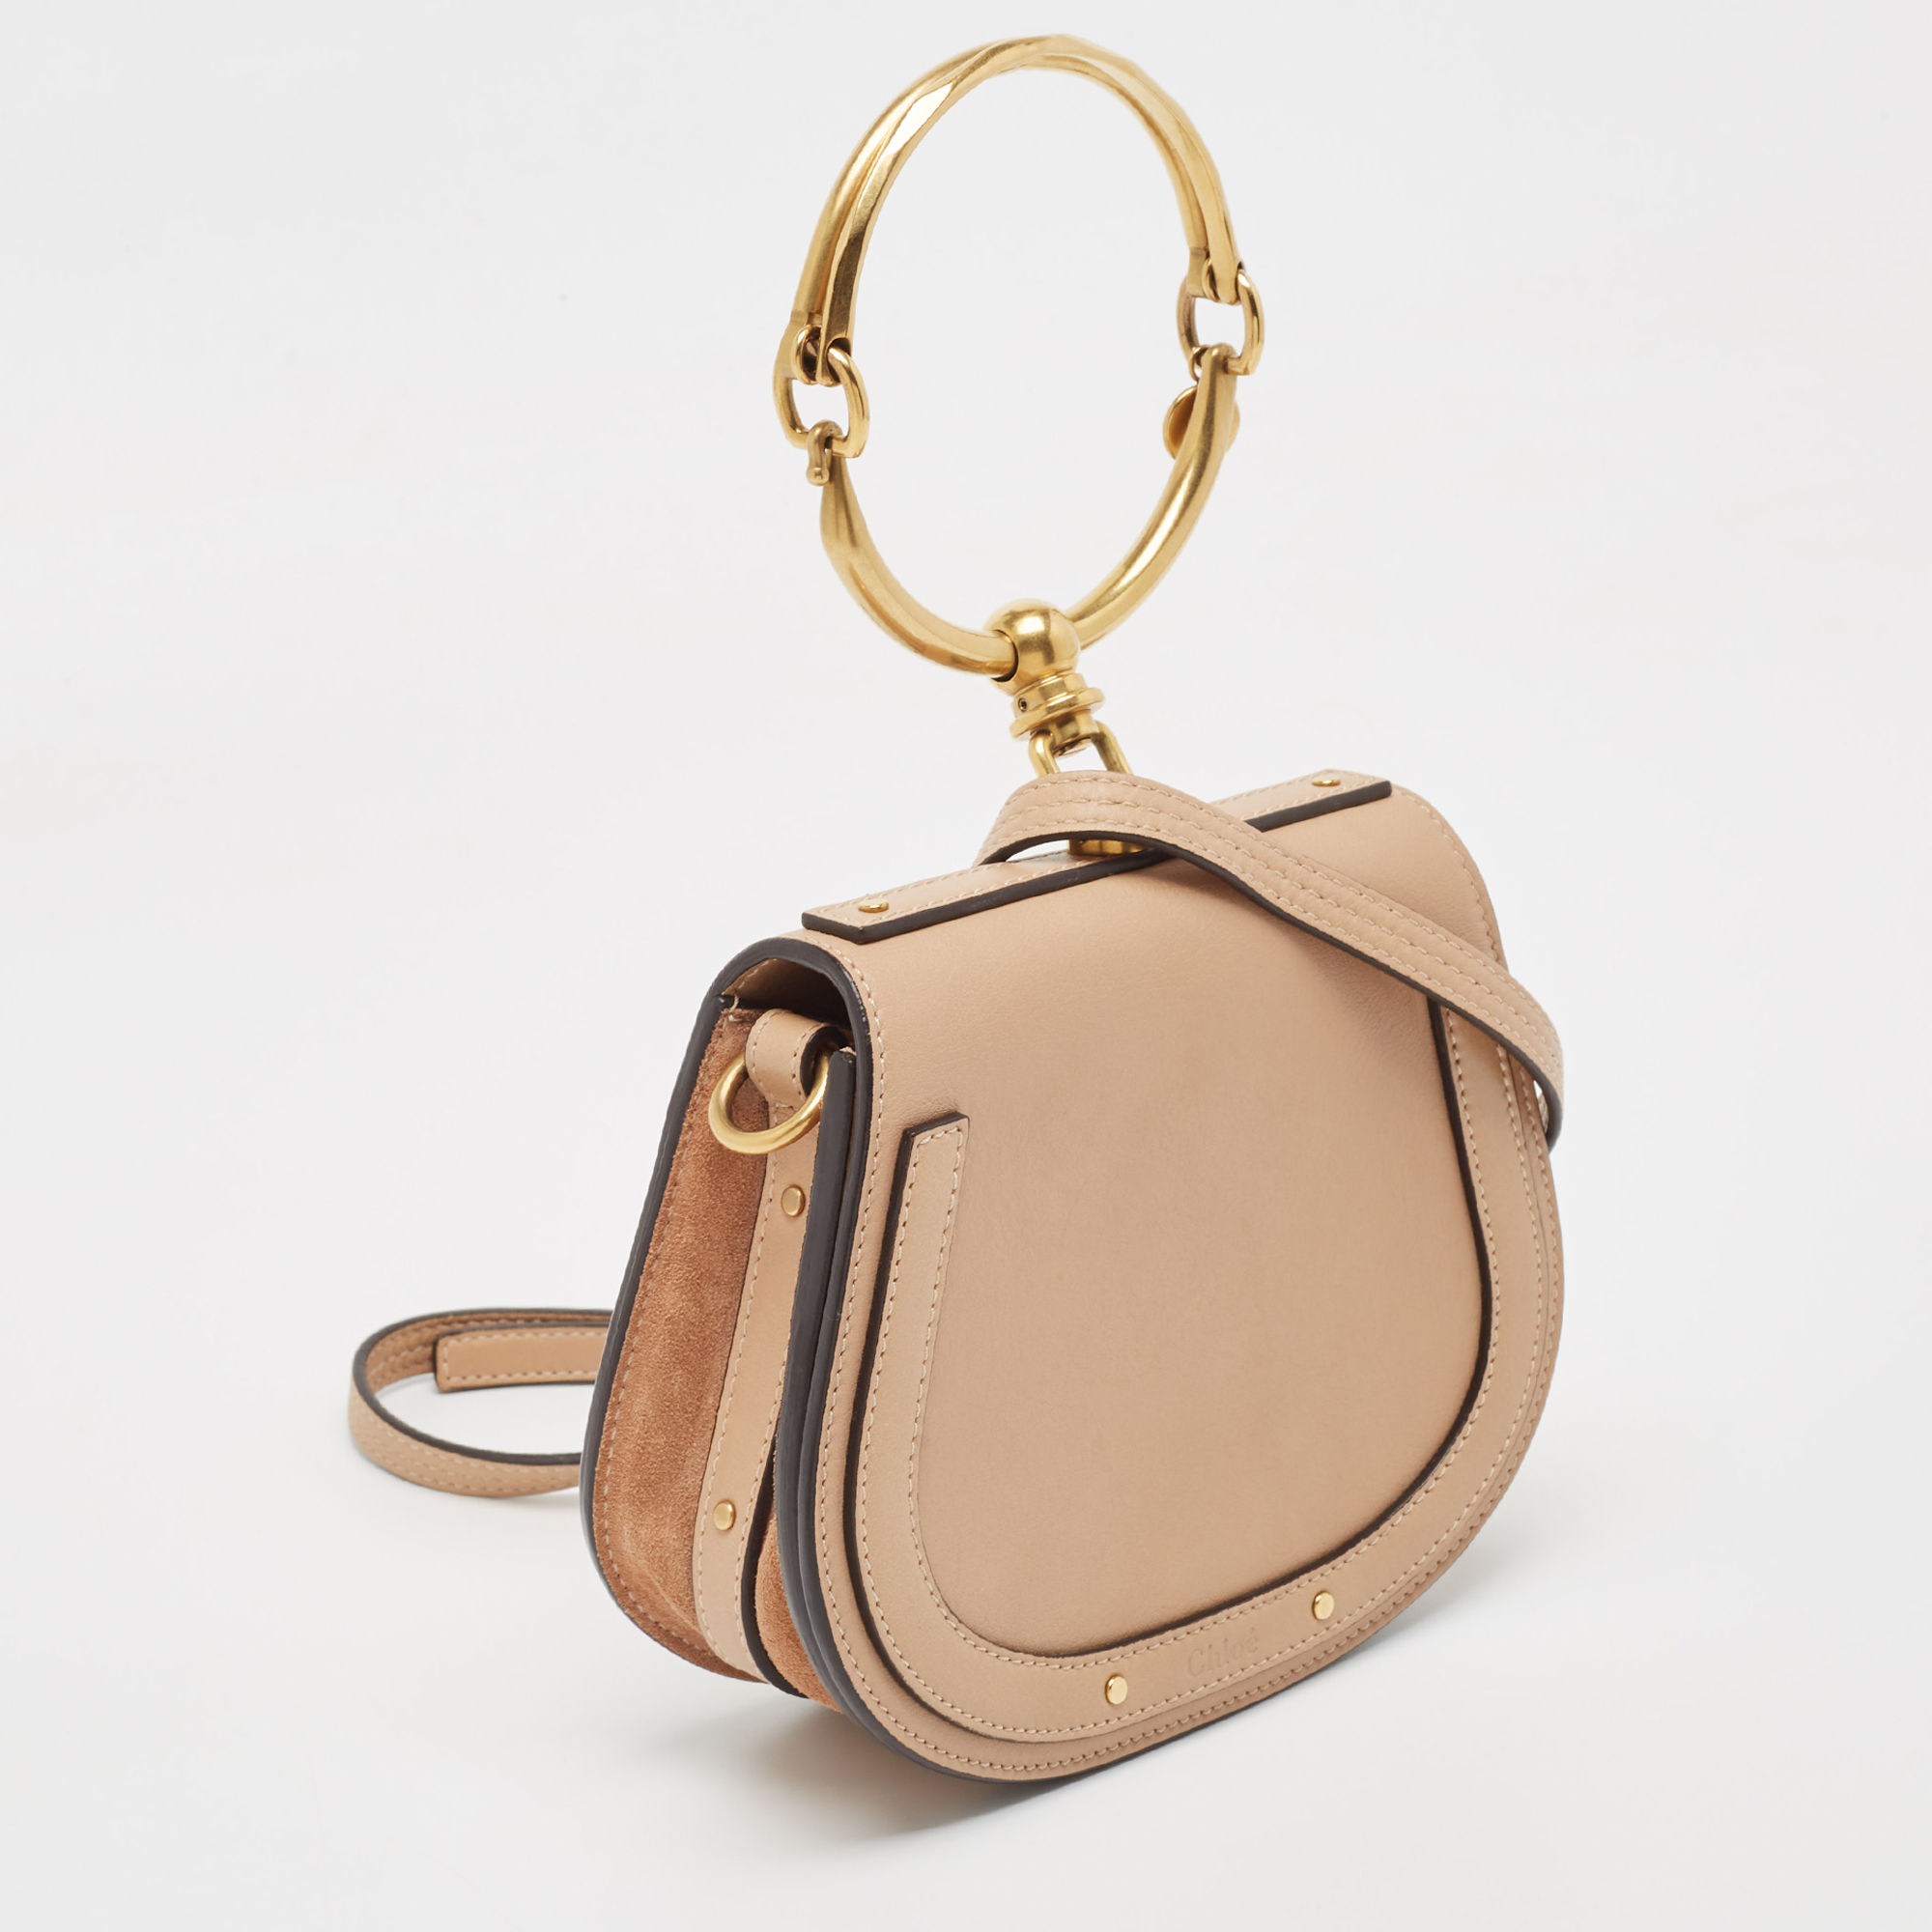 Chloe Beige Leather And Suede Small Nile Bracelet Crossbody Bag